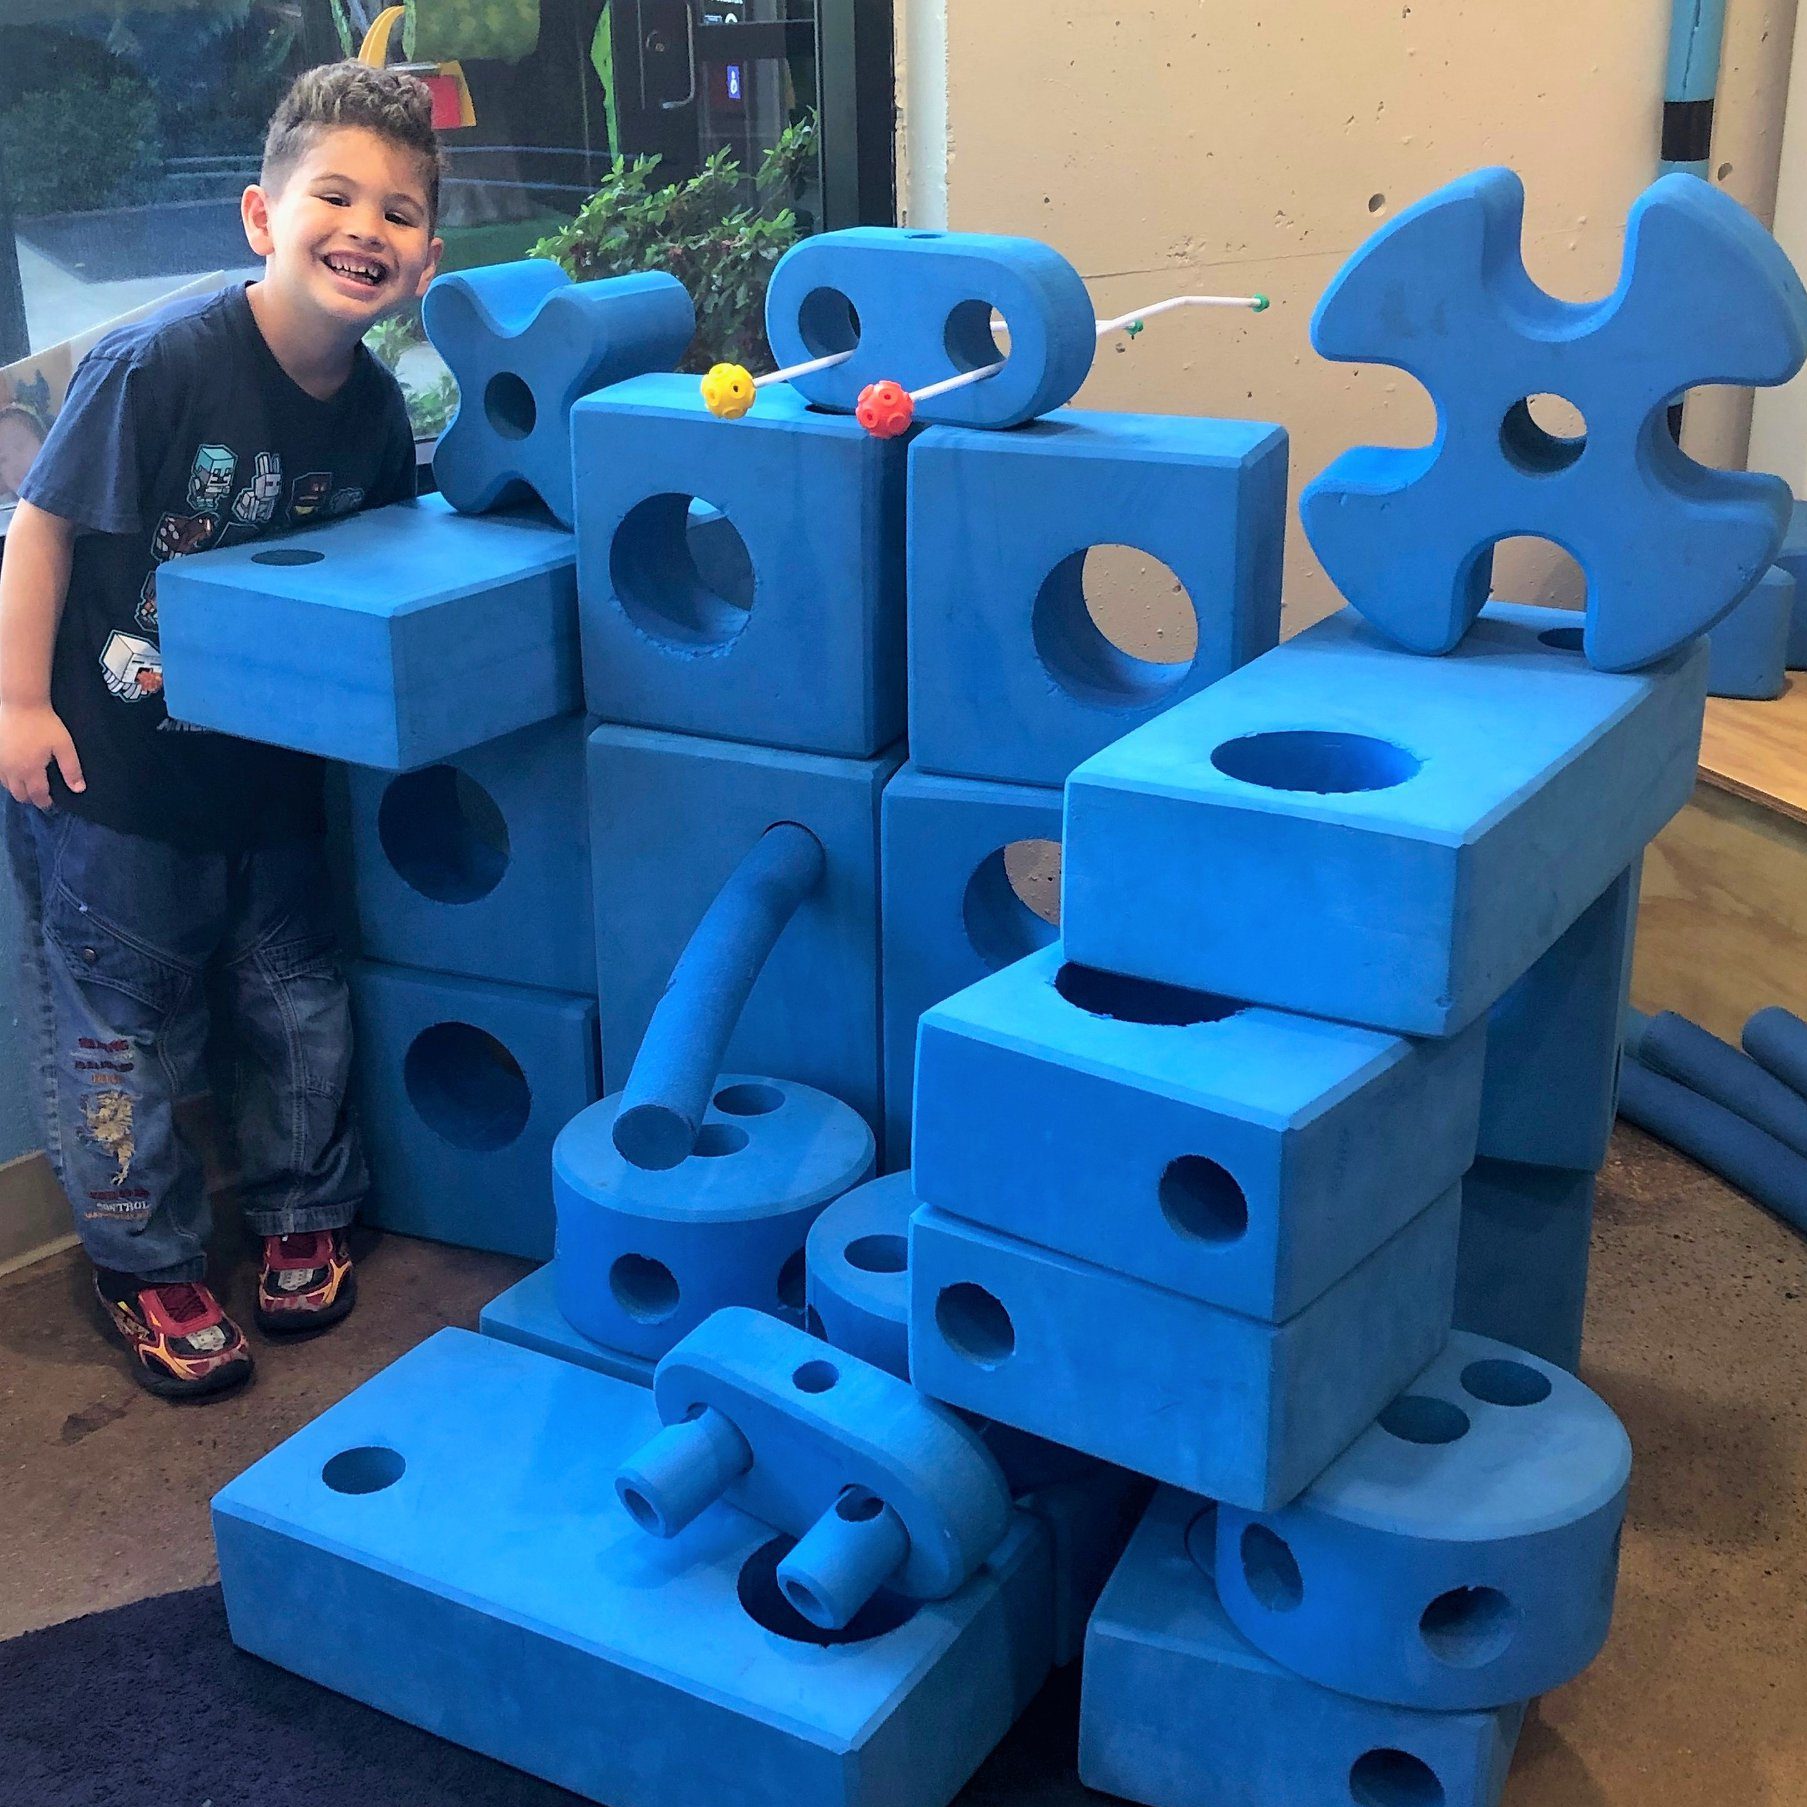 A boy smiles next to a fort made of blue blocks